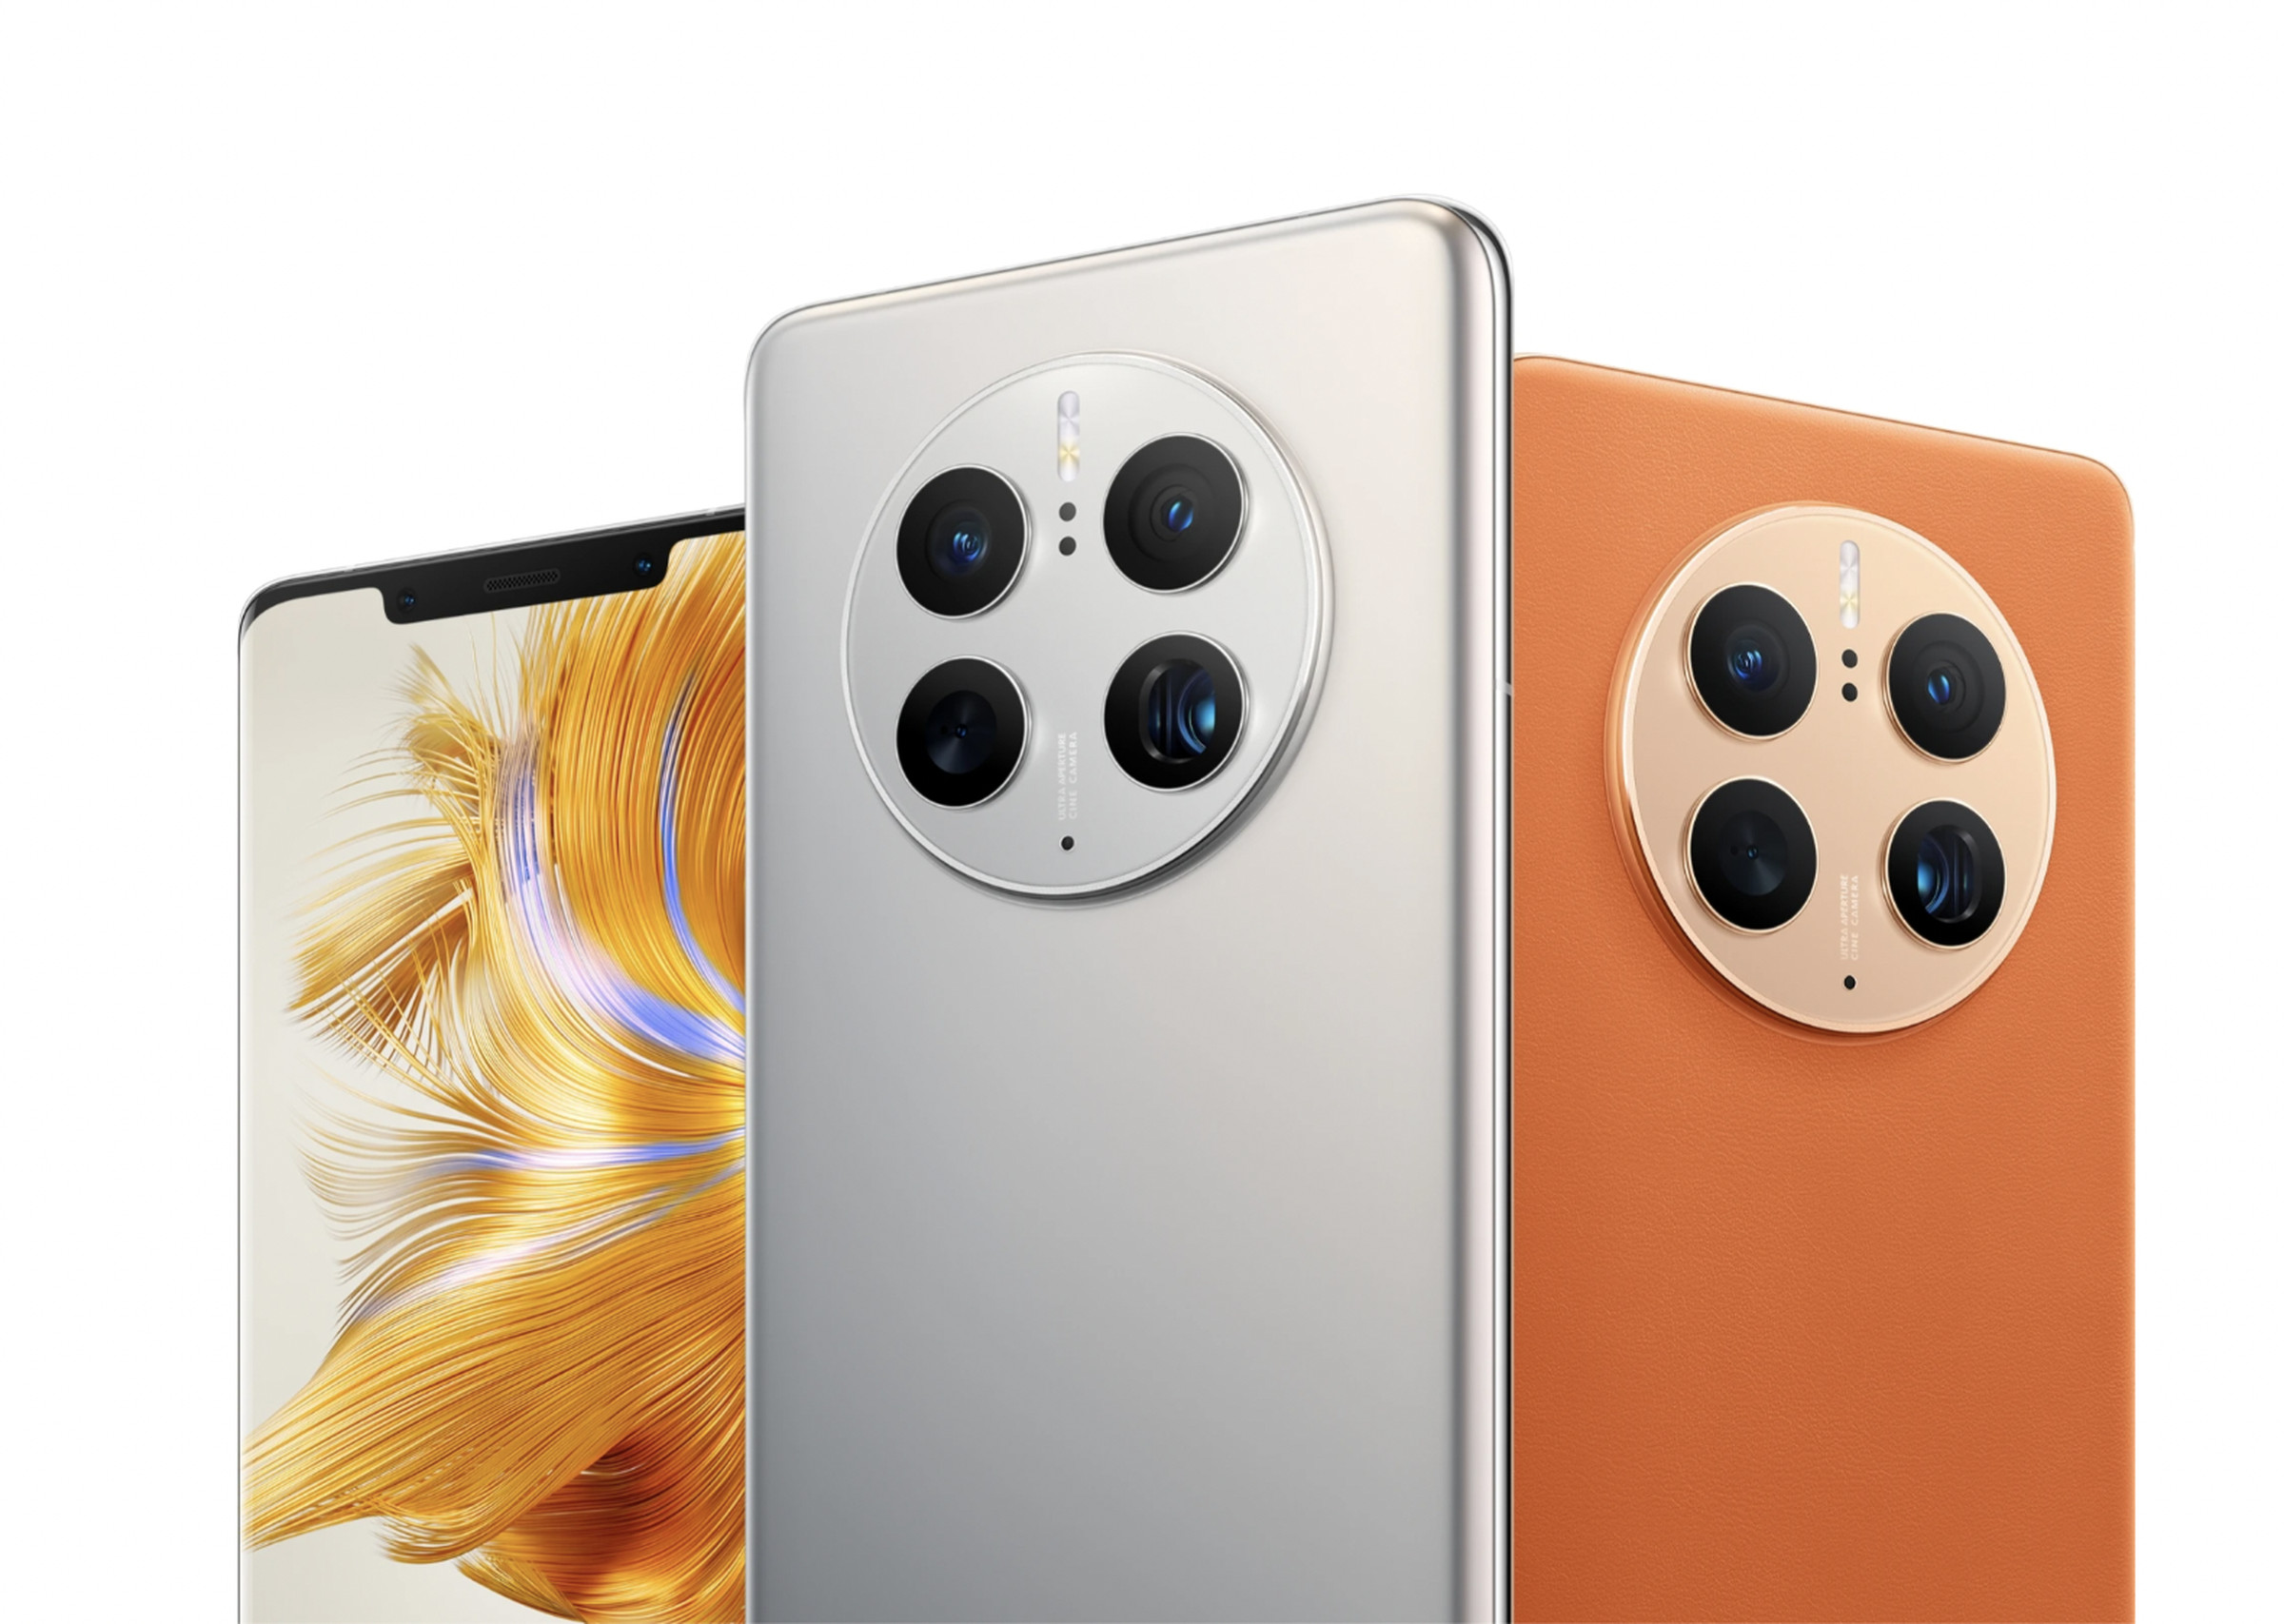 The Huawei Mate 50 Pro comes in a lovely orange color, in addition to black and silver.